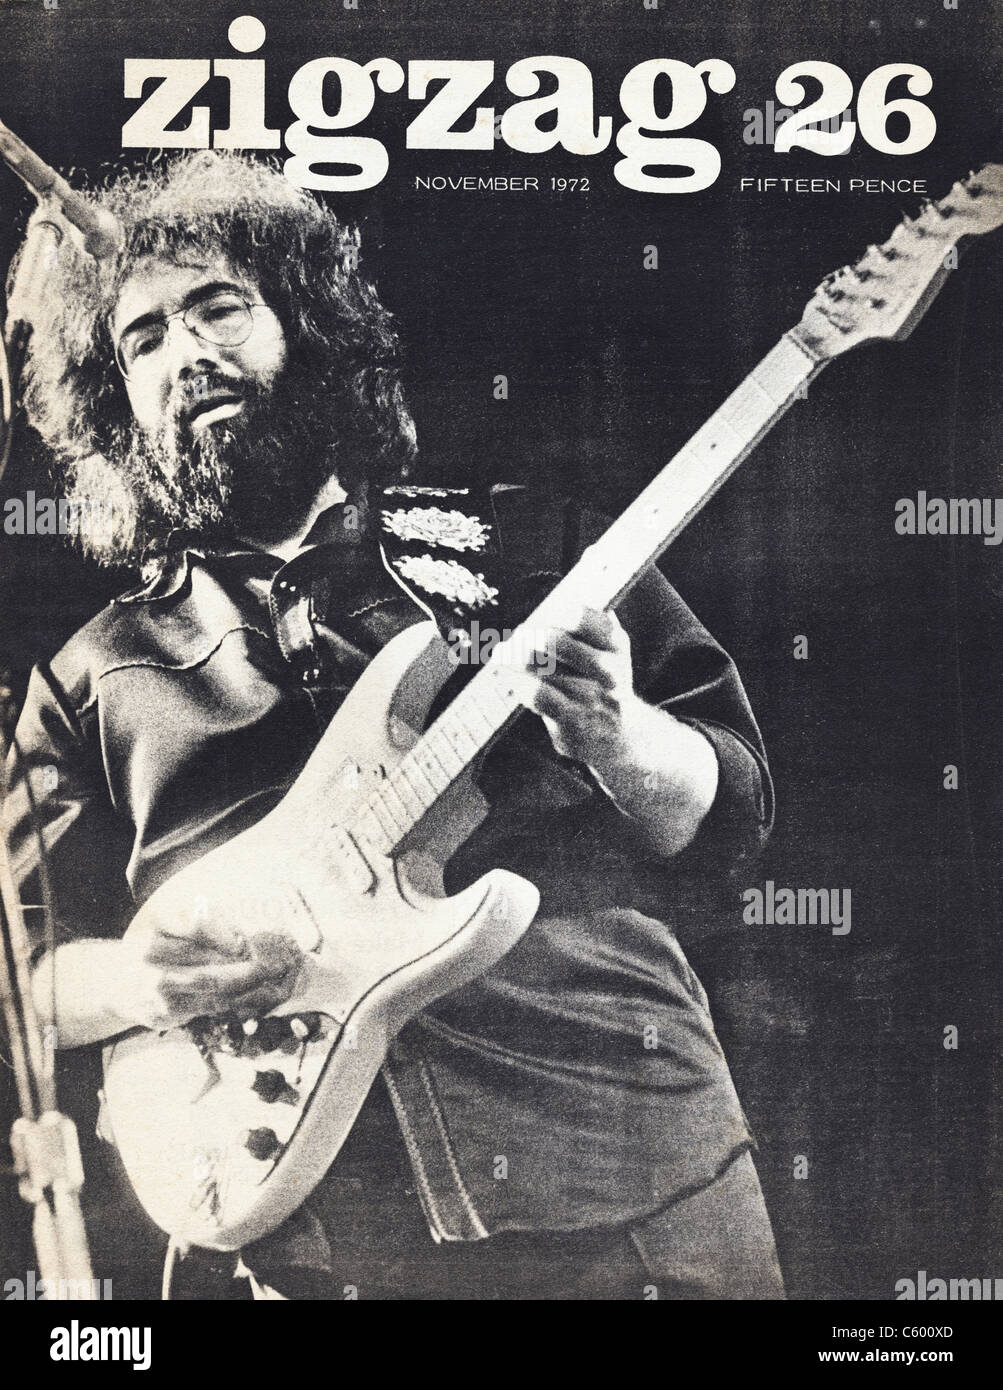 Cover of 1970's rock music magazine ZIGZAG No 26 November 1972 featuring Jerry Garcia of The Grateful Dead Stock Photo